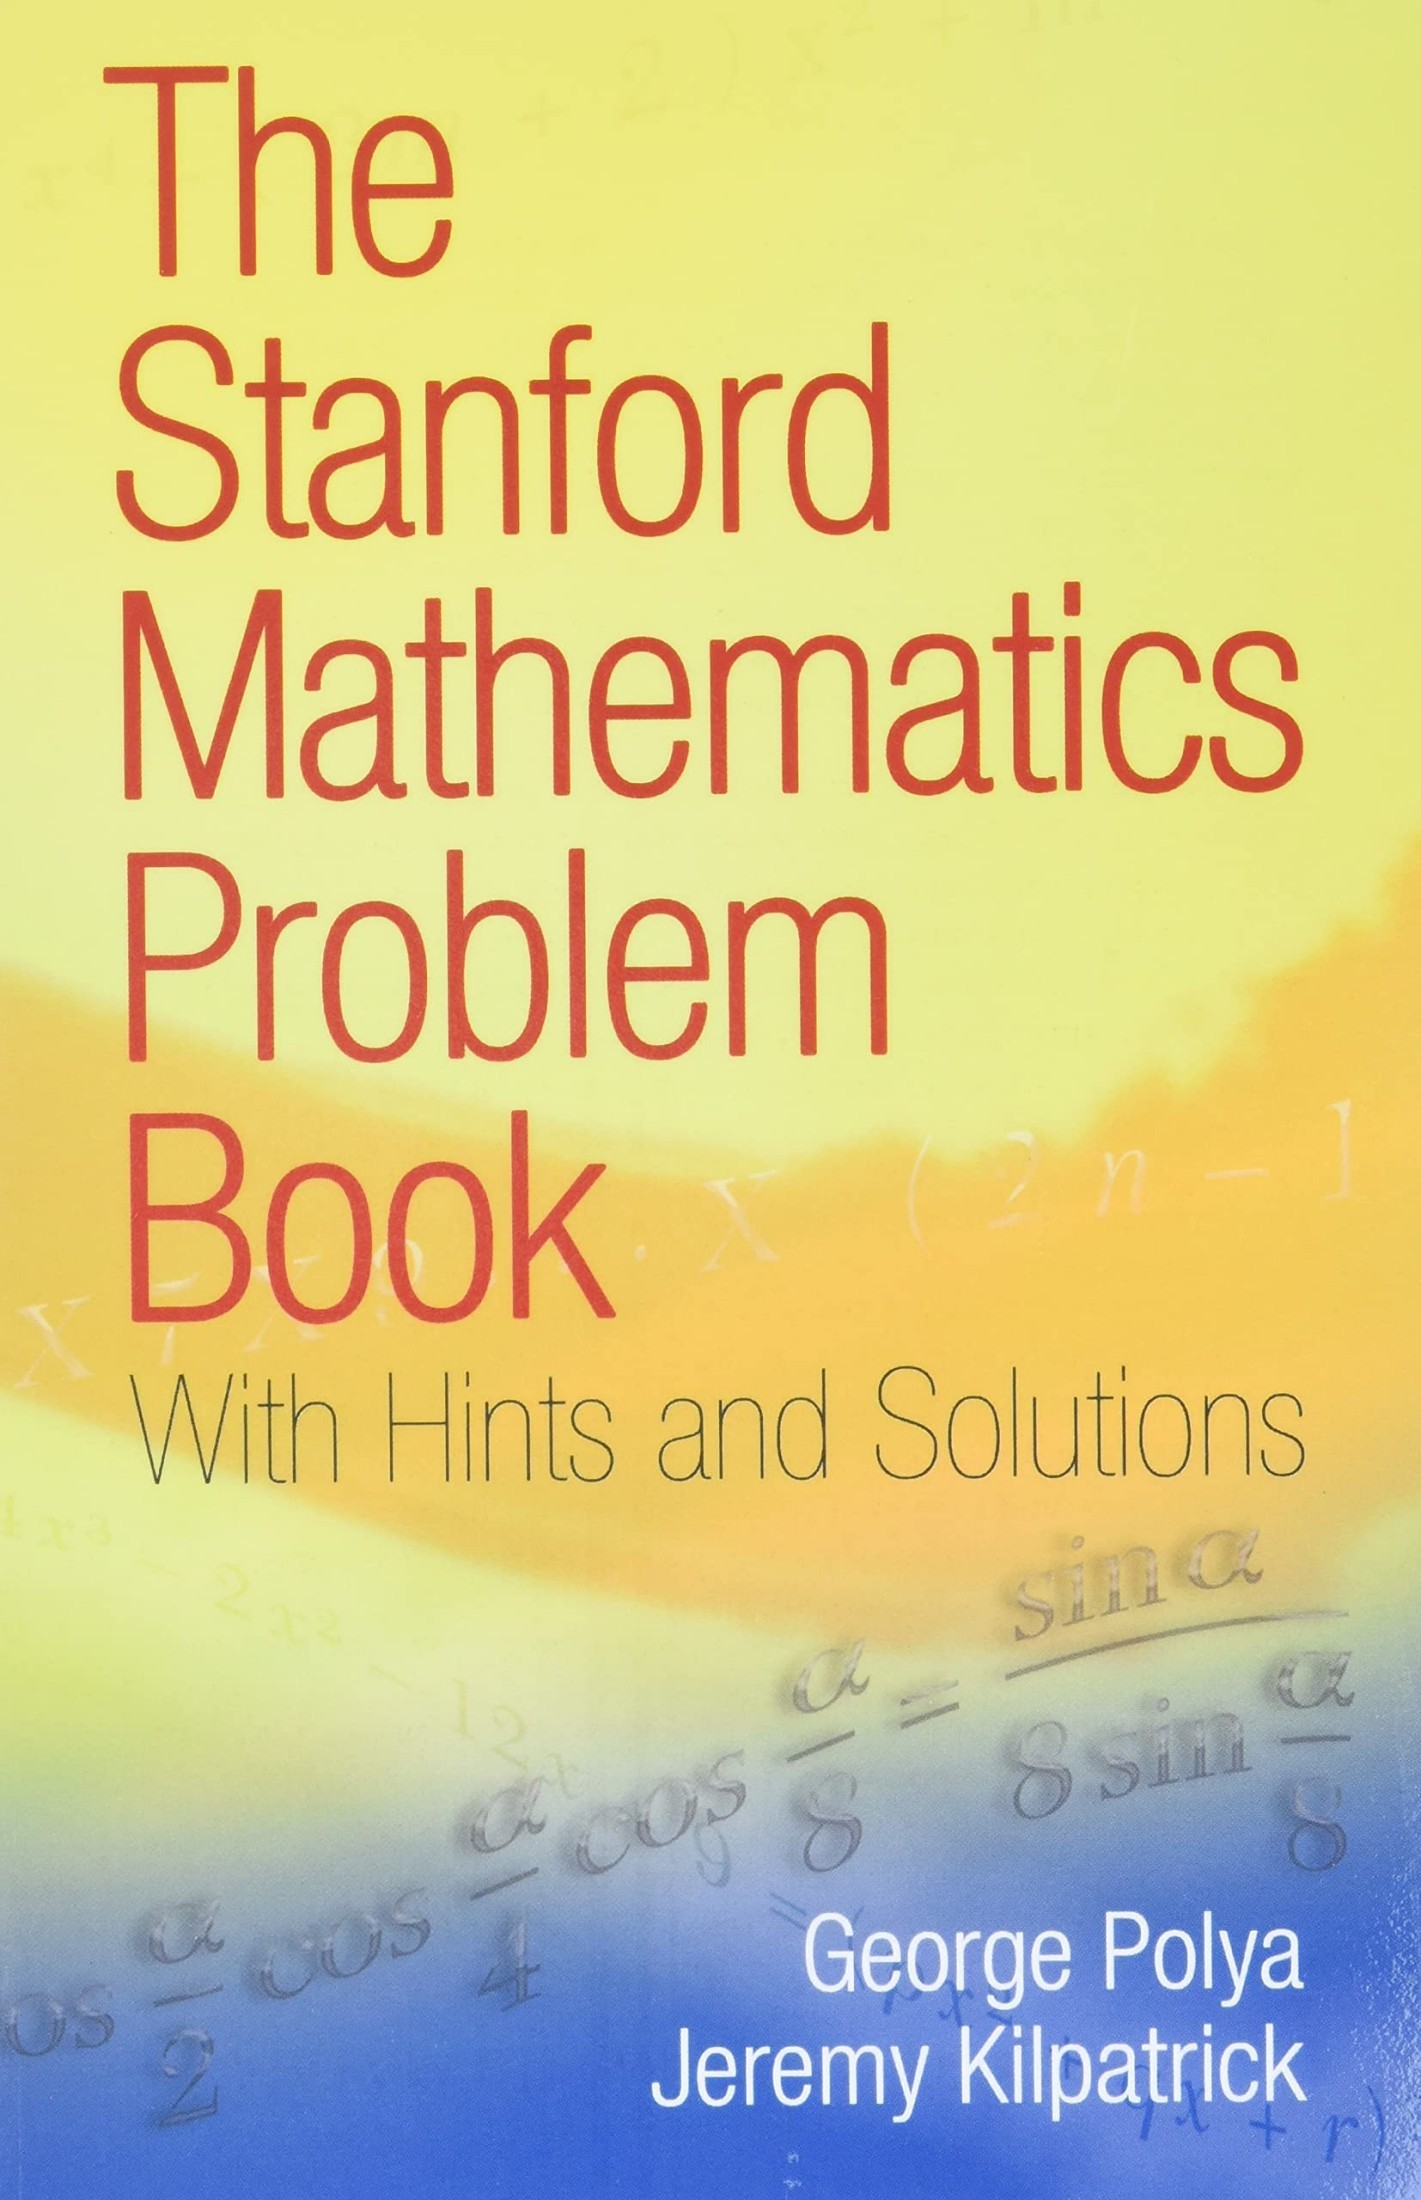 The Stanford Mathematics Problem Book: with Hints and Solutions